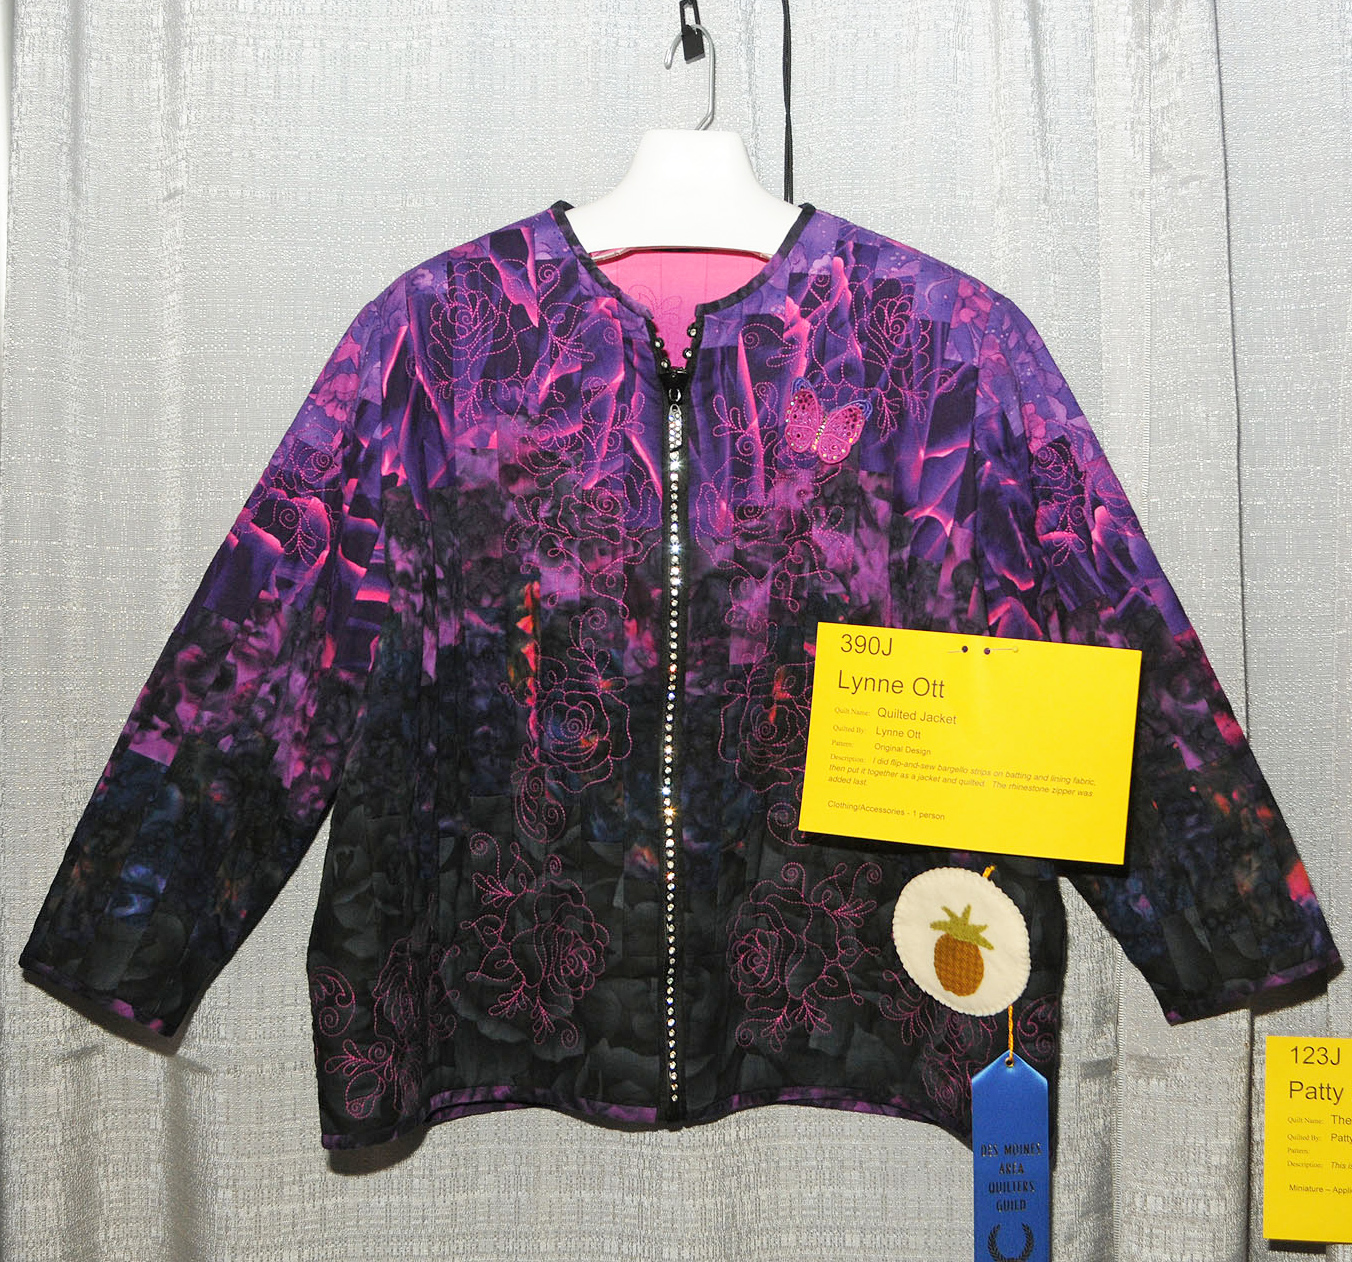 2012 DMAQG Ribbon Winners – Des Moines Area Quilter's Guild